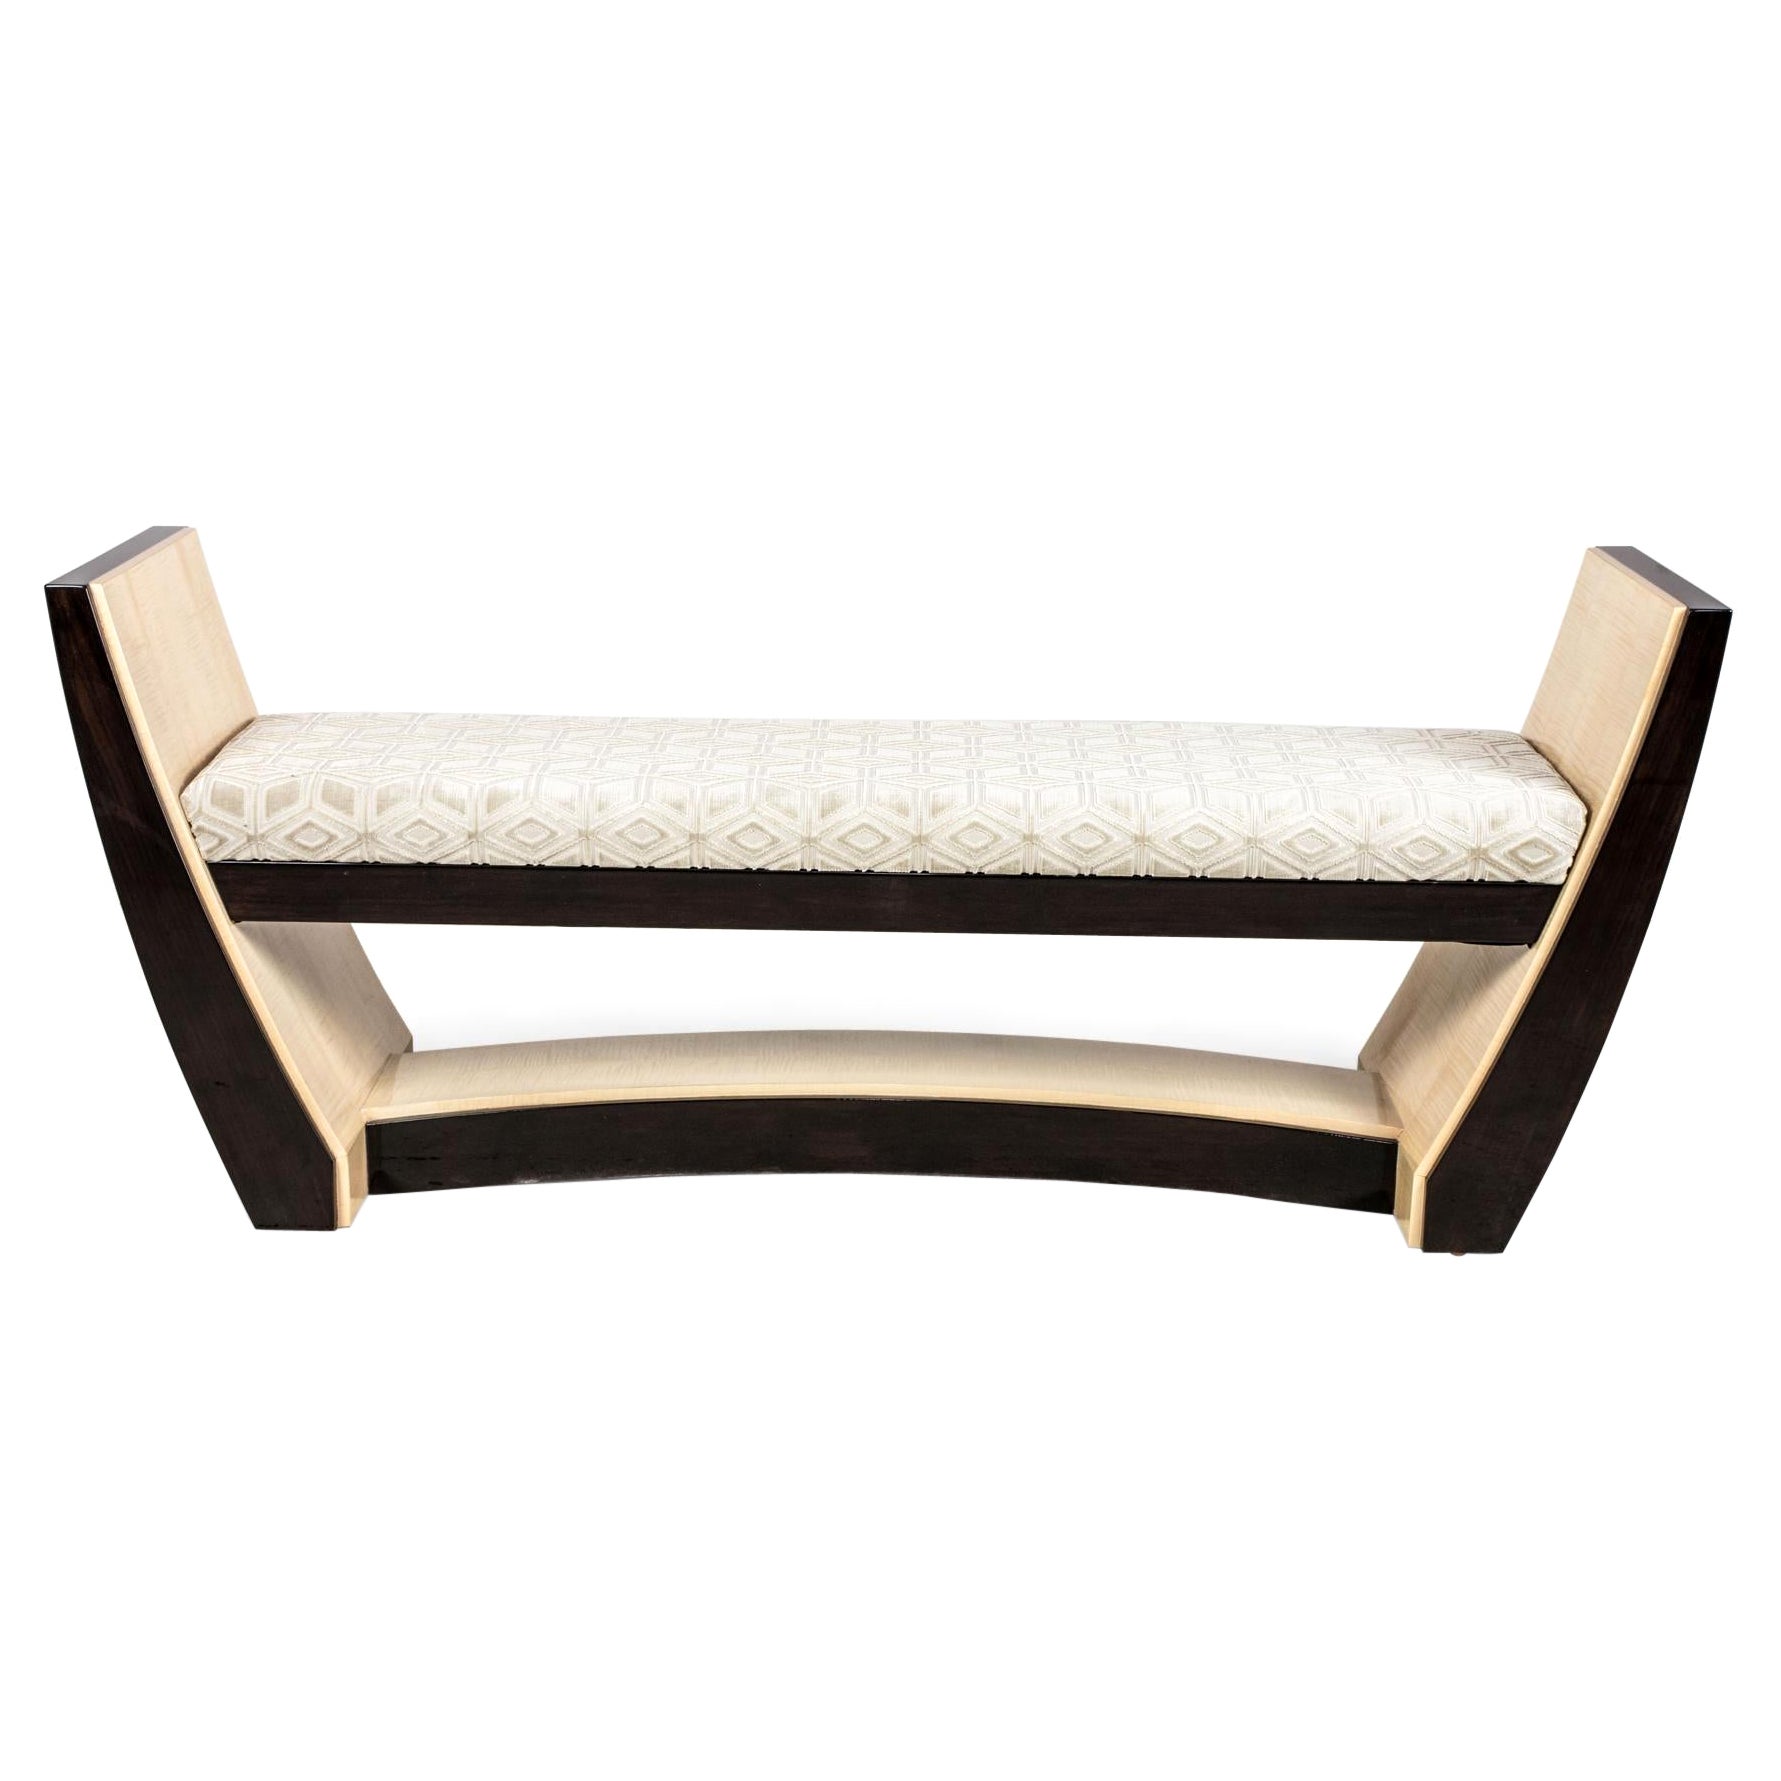 French Art Deco Style Custom Maple & Sycamore Upholstered Bench